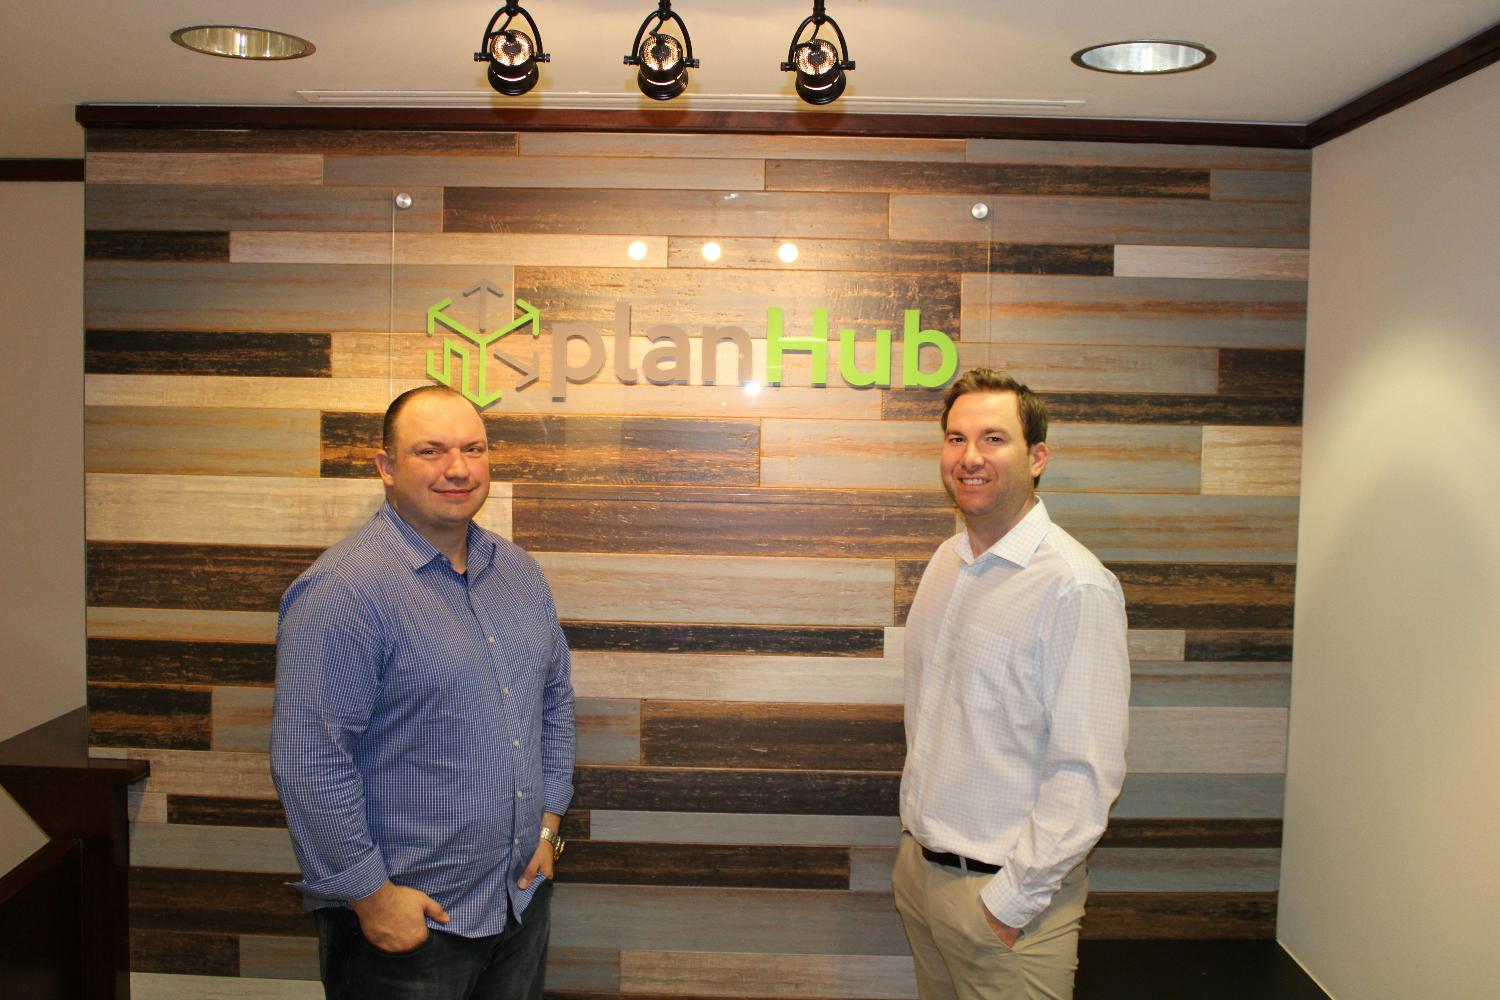 From left to right:  Kevin Priddy, CEO and Founder of PlanHub and Kyle Conlan, VP and Co-Founder of PlanHub.